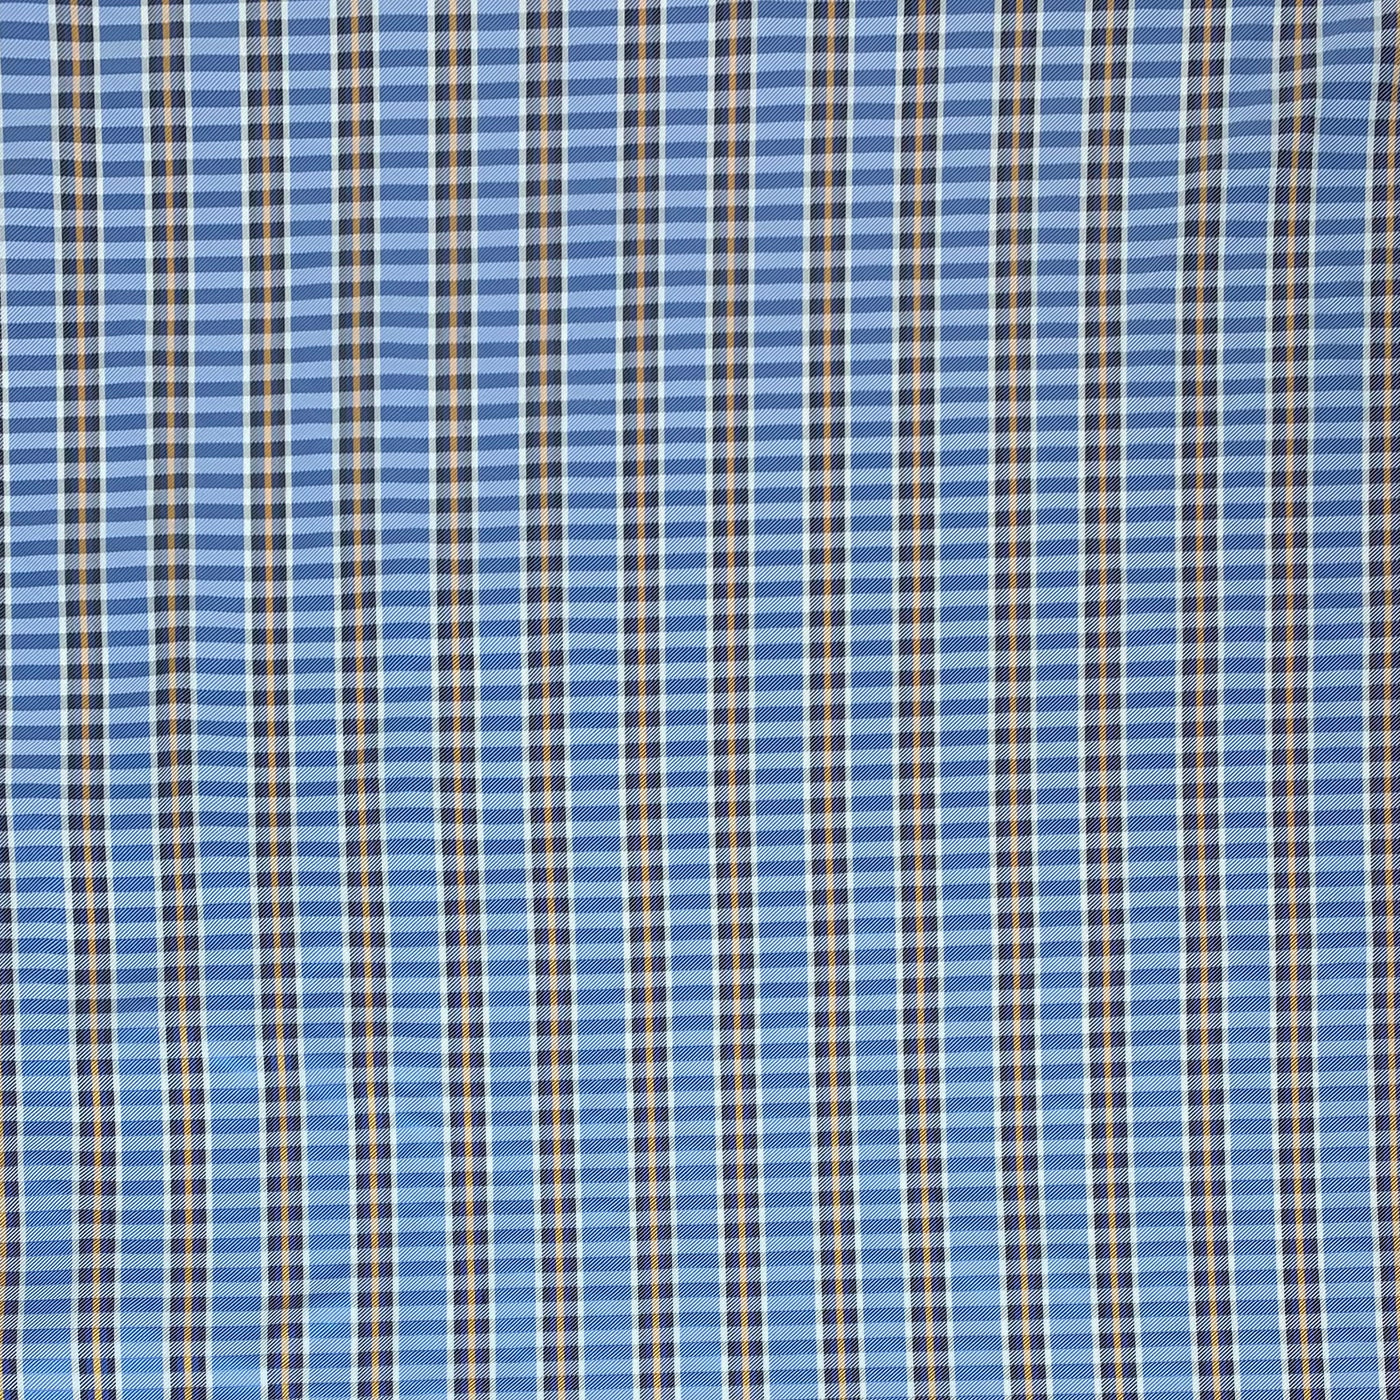 Plaid Silk/Polyester - Blue / White / Yellow - Remnant